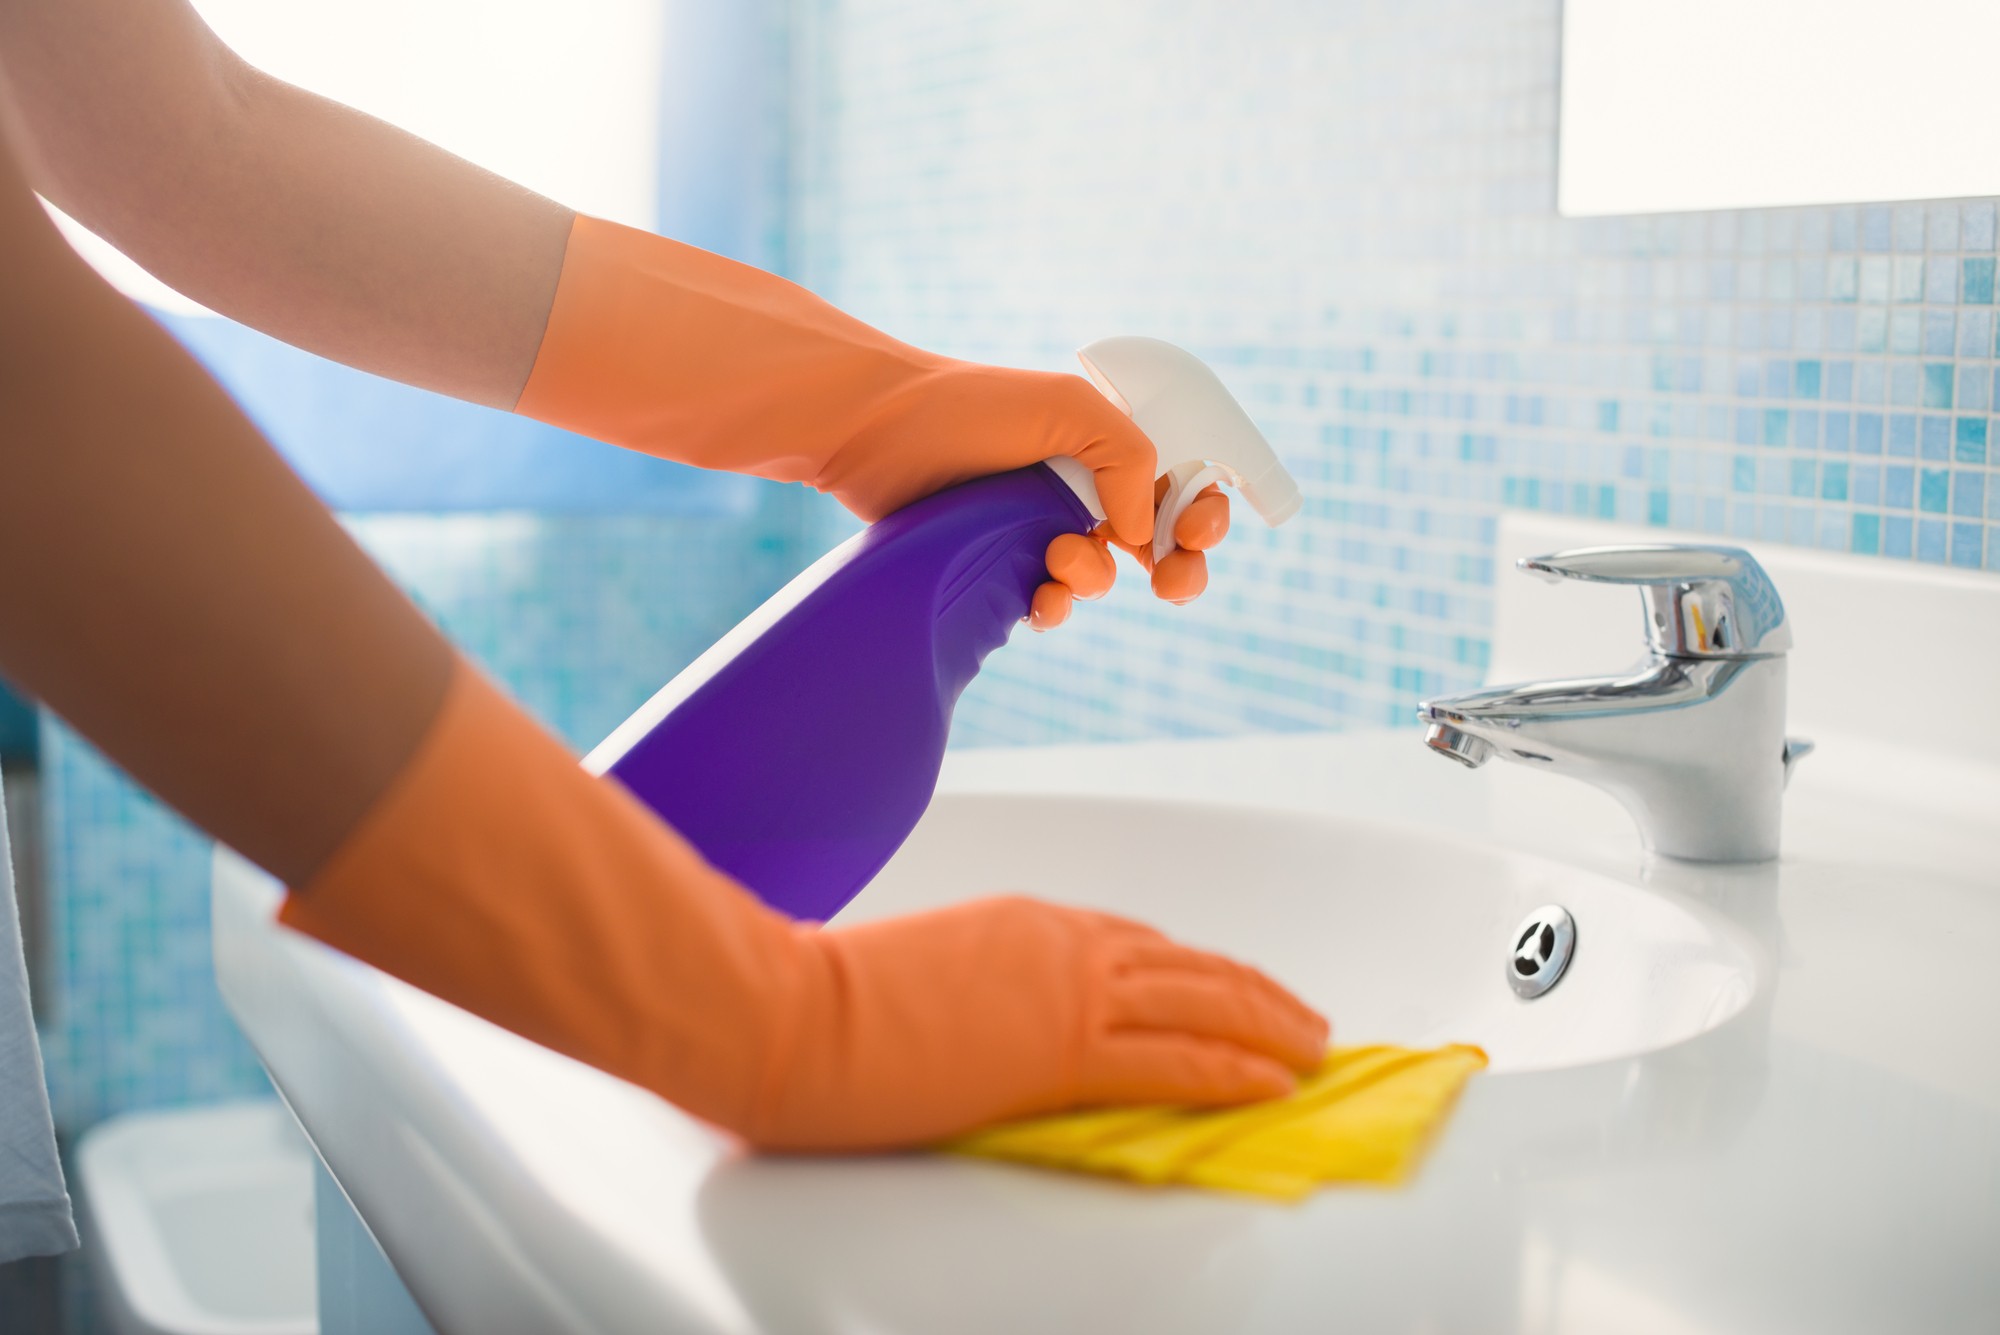 12 Hidden Places in Your Home You Haven’t Cleaned (But Probably Should)